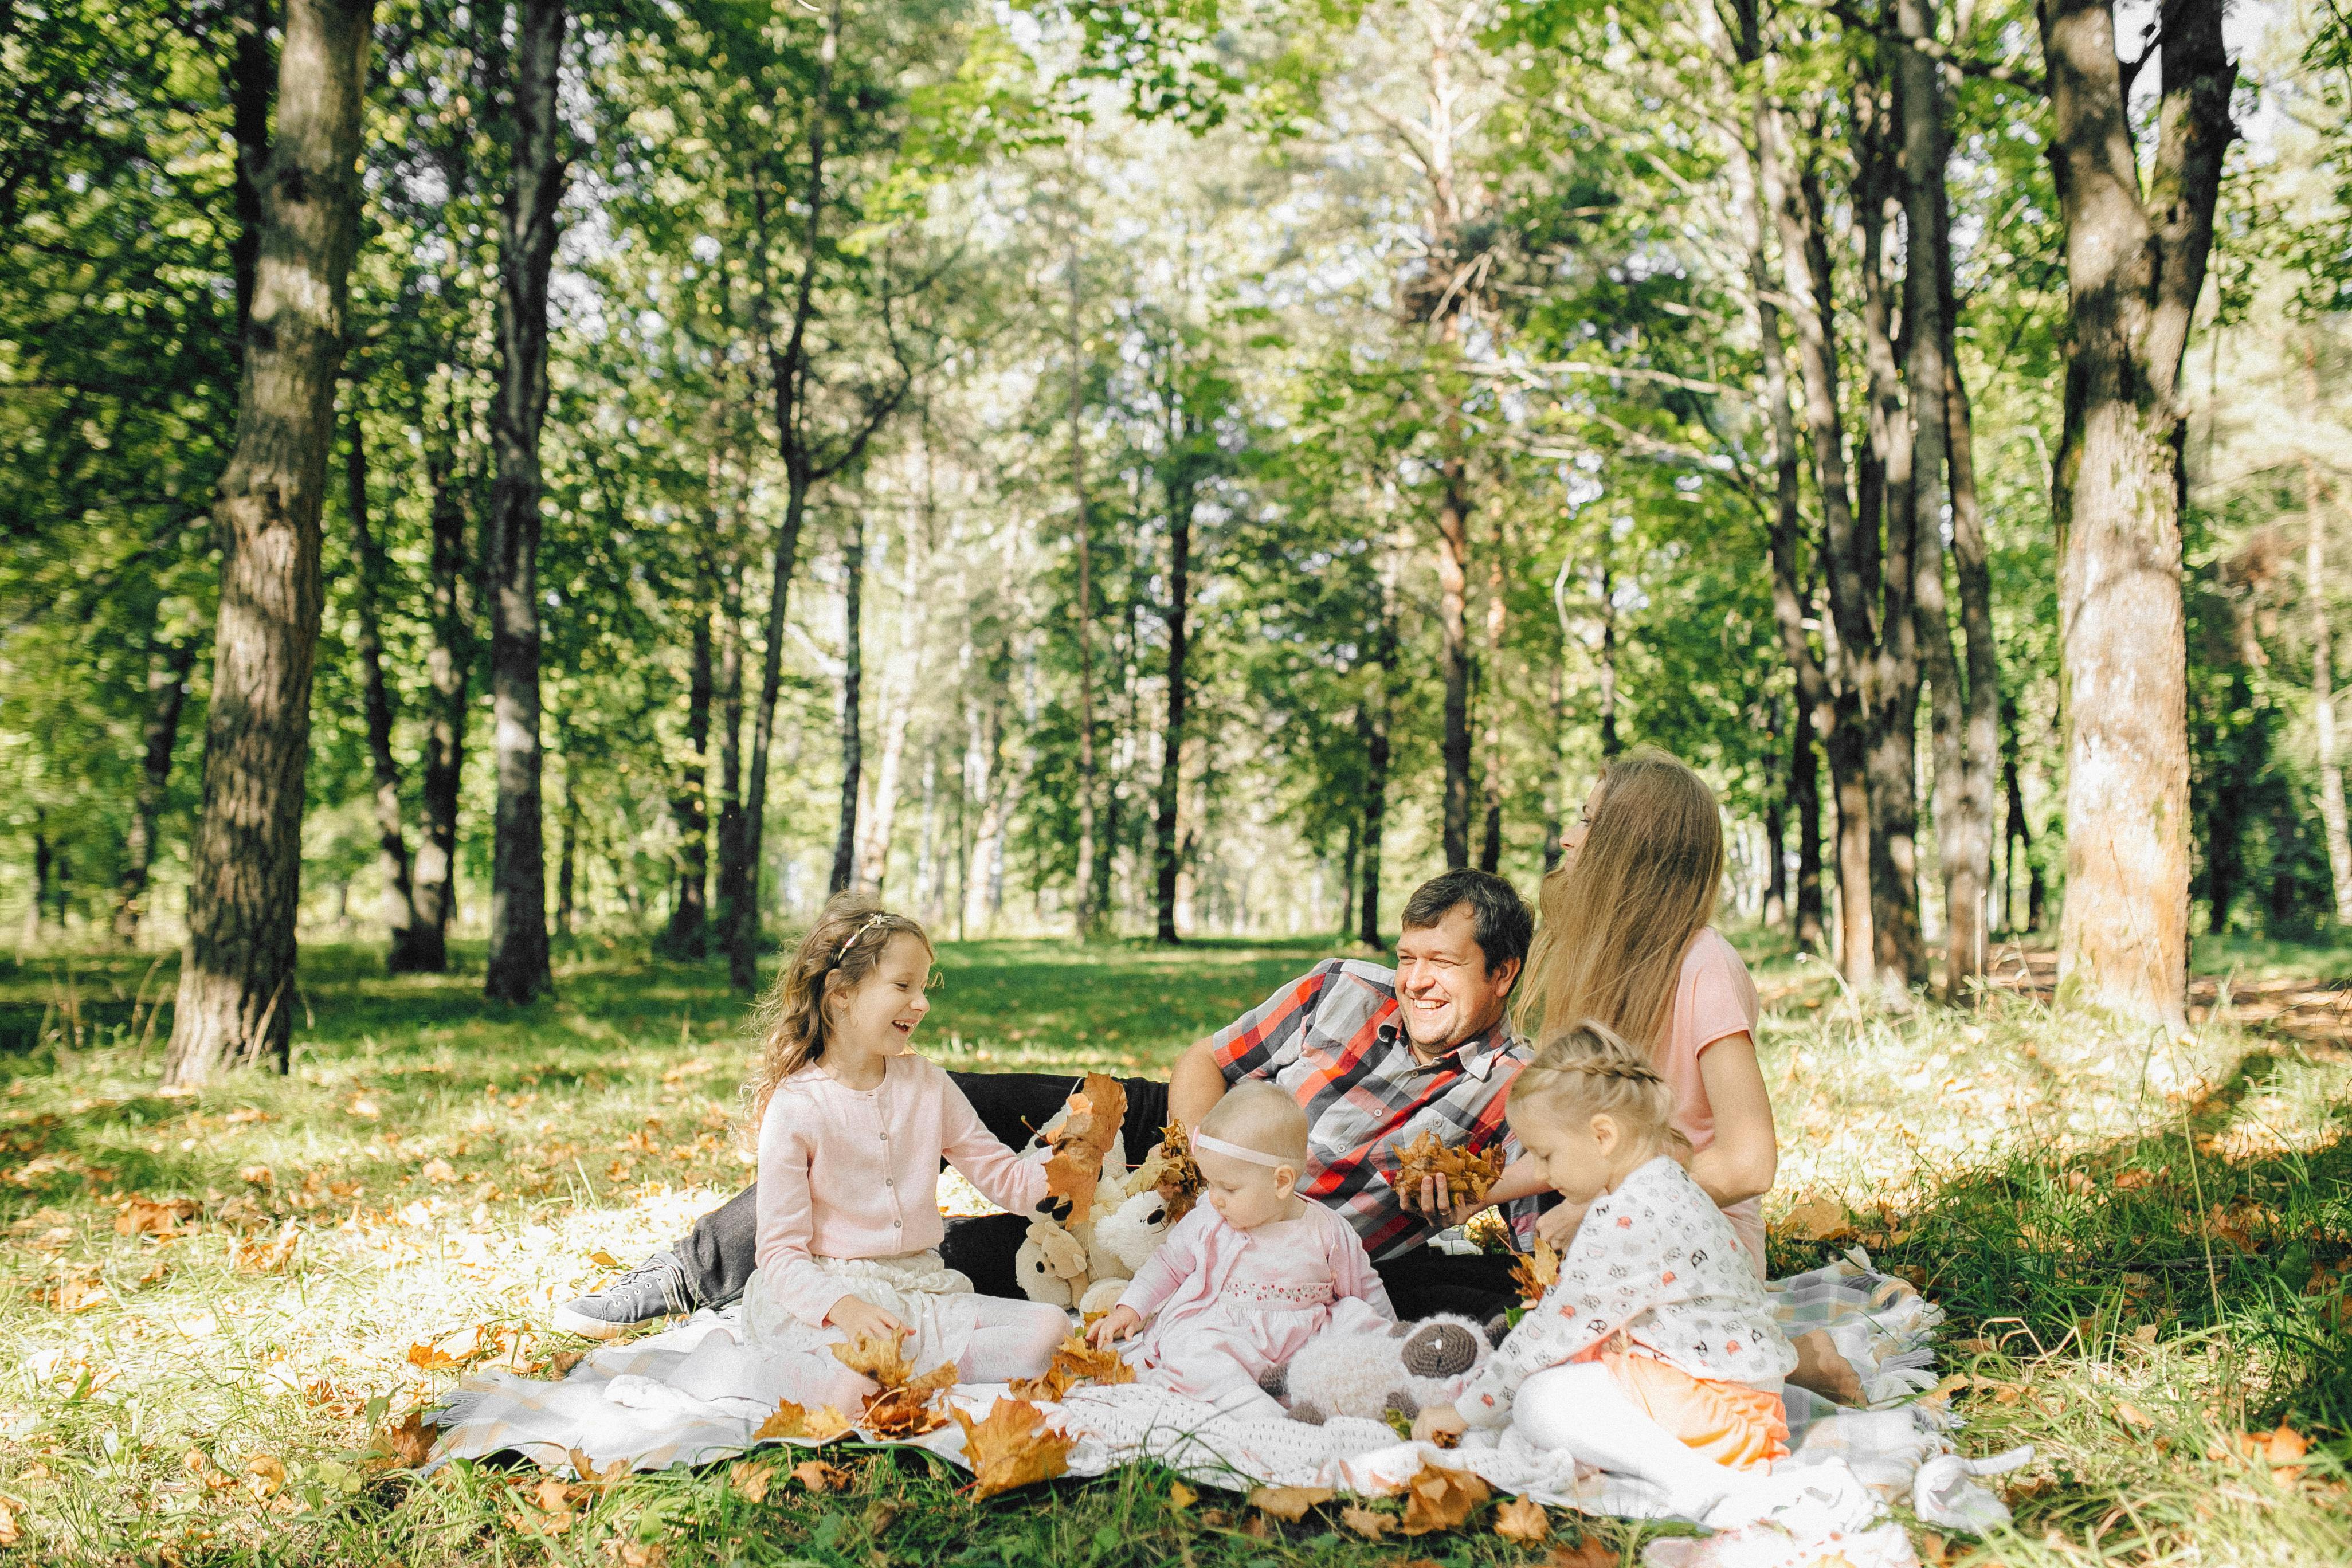 Parents and their three young children enjoying a picnic | Source: Pexels